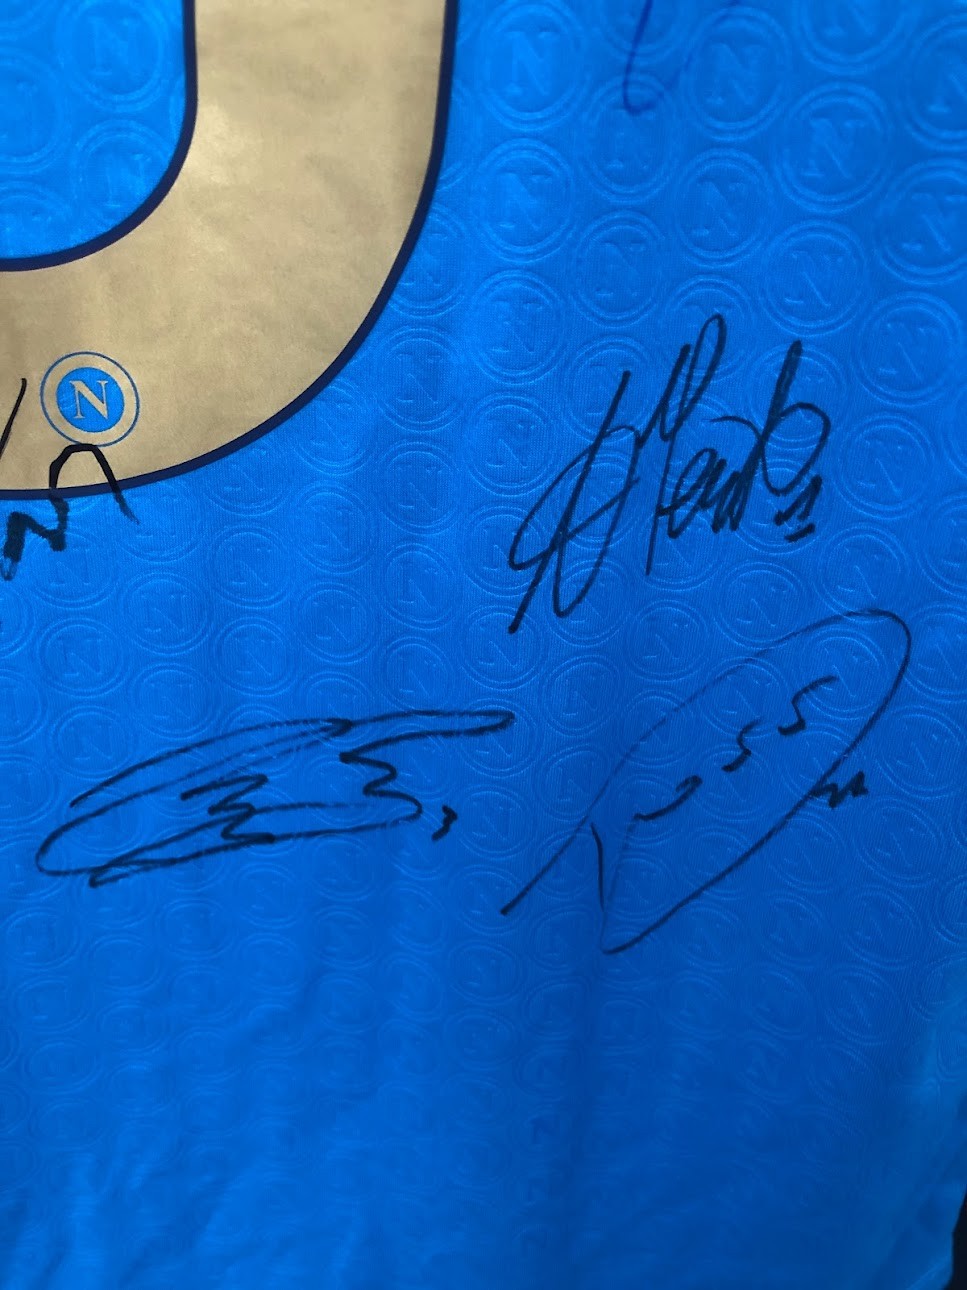 Napoli's Official Scudetto Shirt - Signed by the Squad - CharityStars